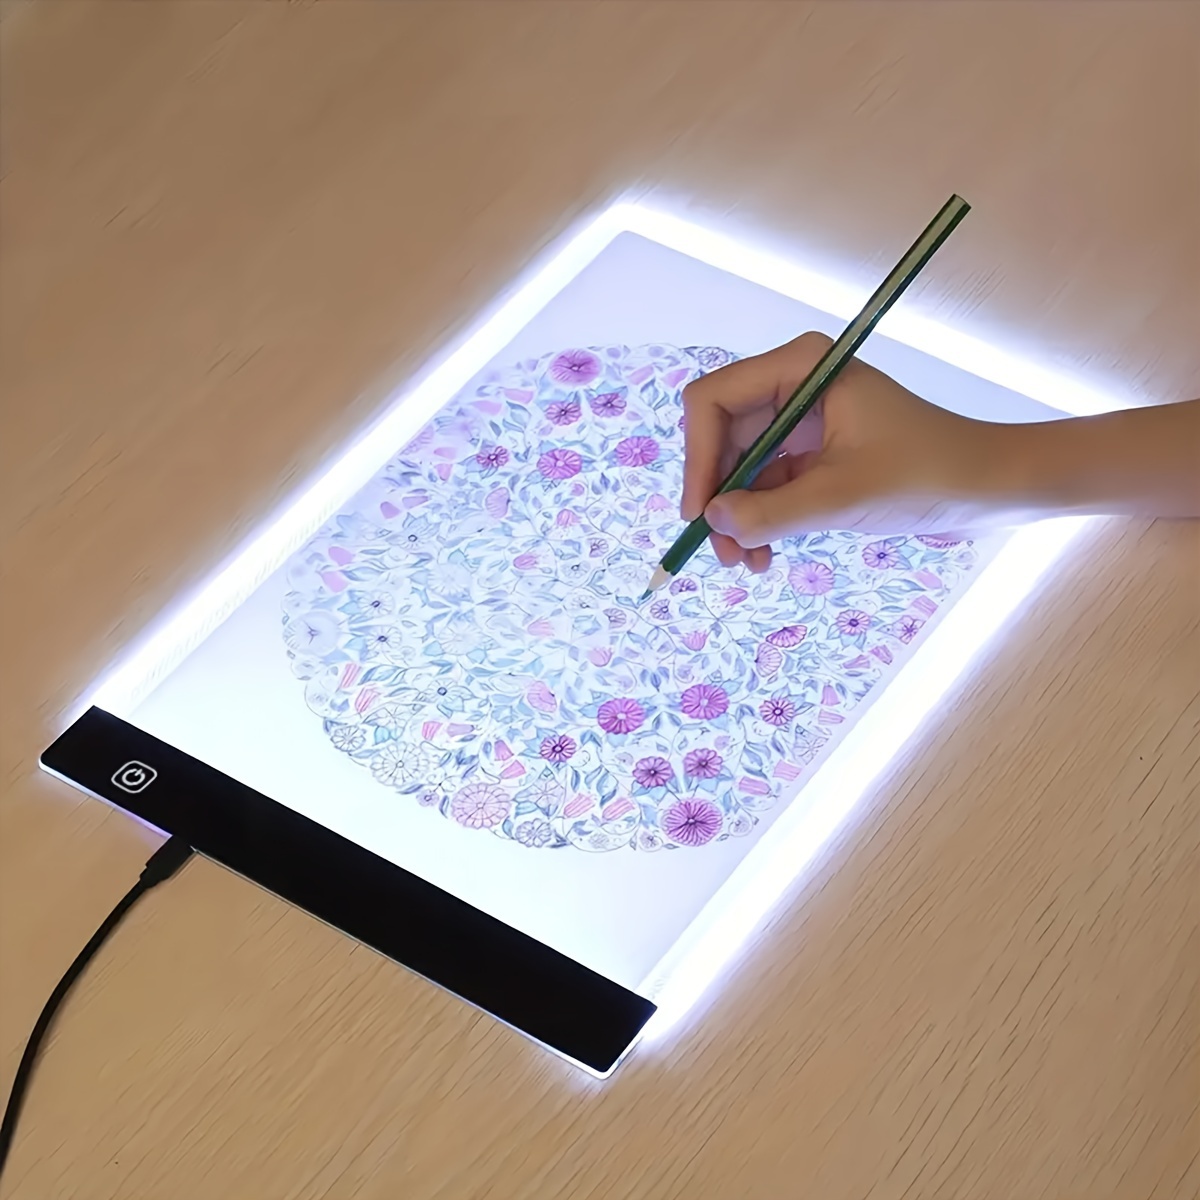 

1pc Portable A5/a4 Led Copy Board, Light Tracing Box, Ultra-thinadjustable Usb Interface Led Trace Light Pad For Tattoo Drawing.streaming, Sketching, Animation, Stenciling